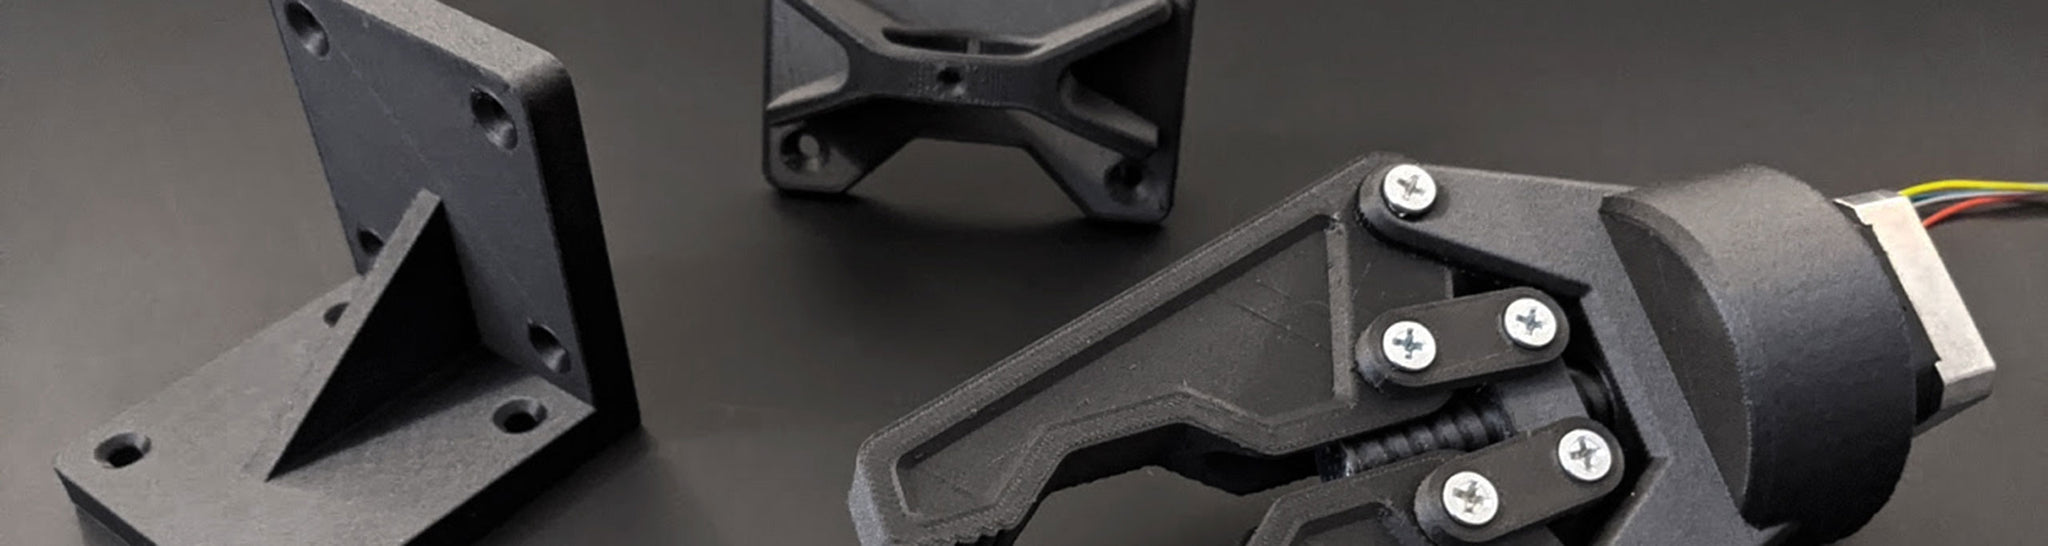 The advantages of 3D printing with carbon fiber